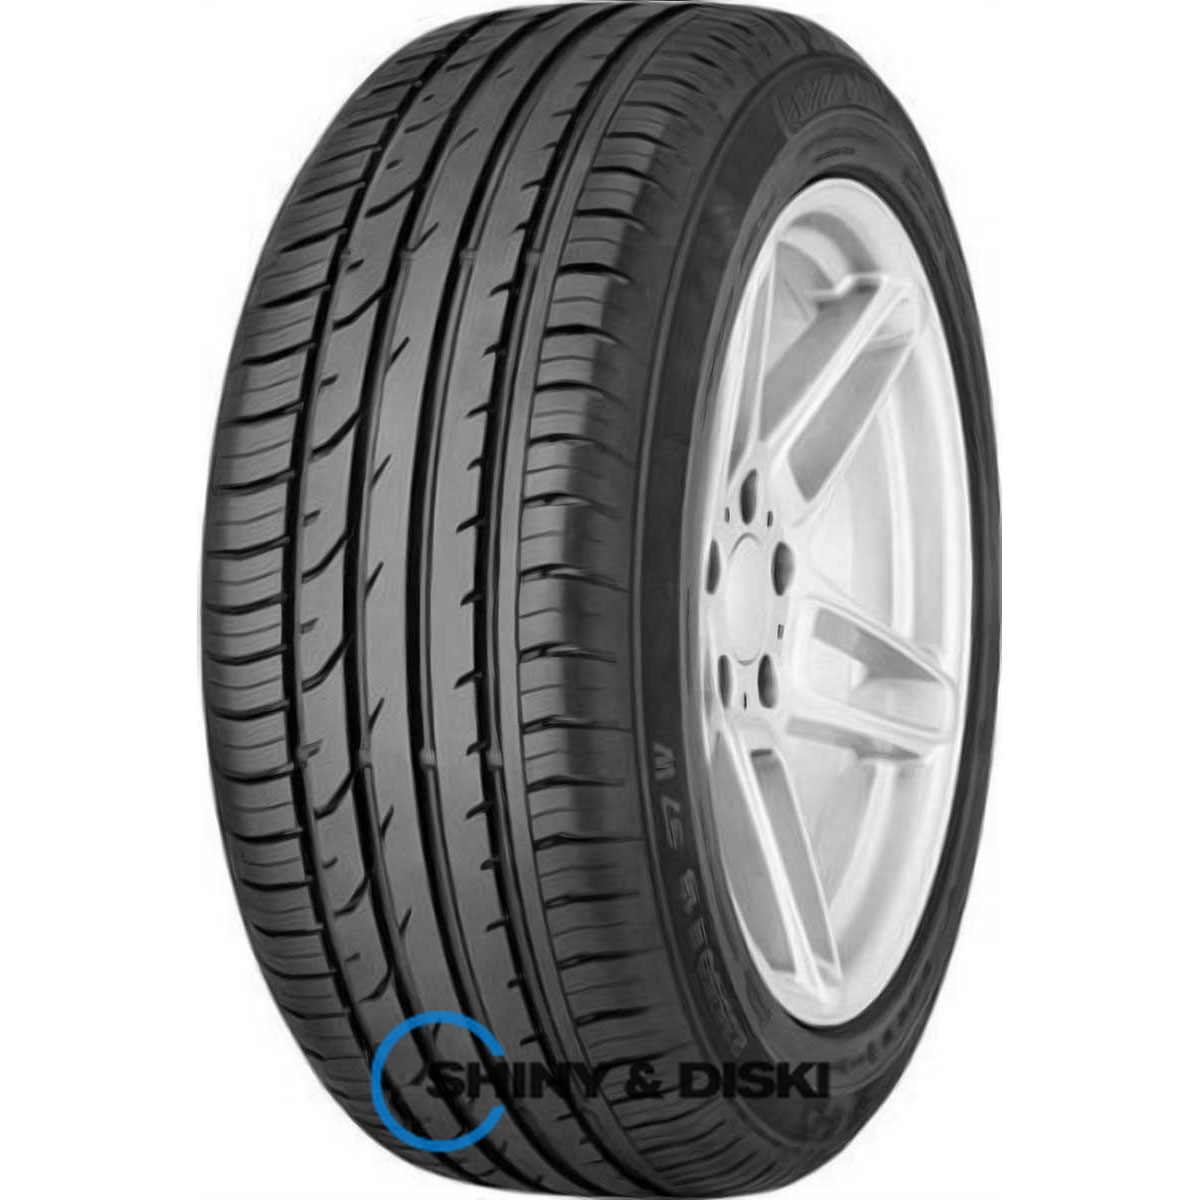 continental contipremiumcontact 2 205/55 r15 98h